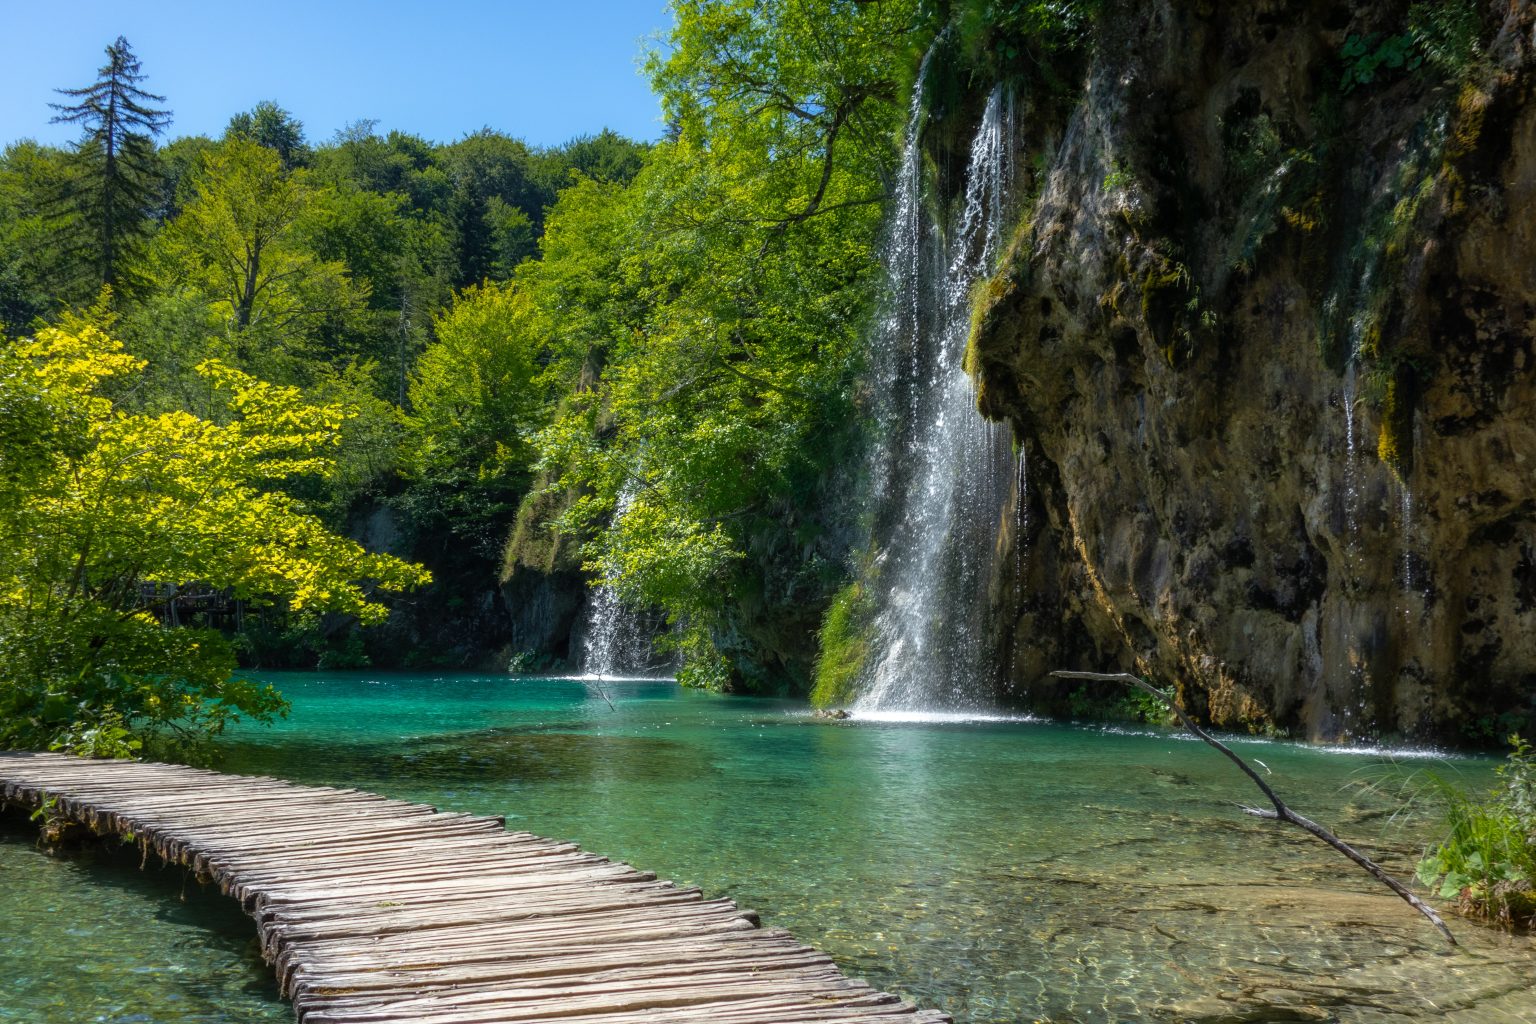 LIVE See Plitvice lakes on livecam! | The Plitvice Times